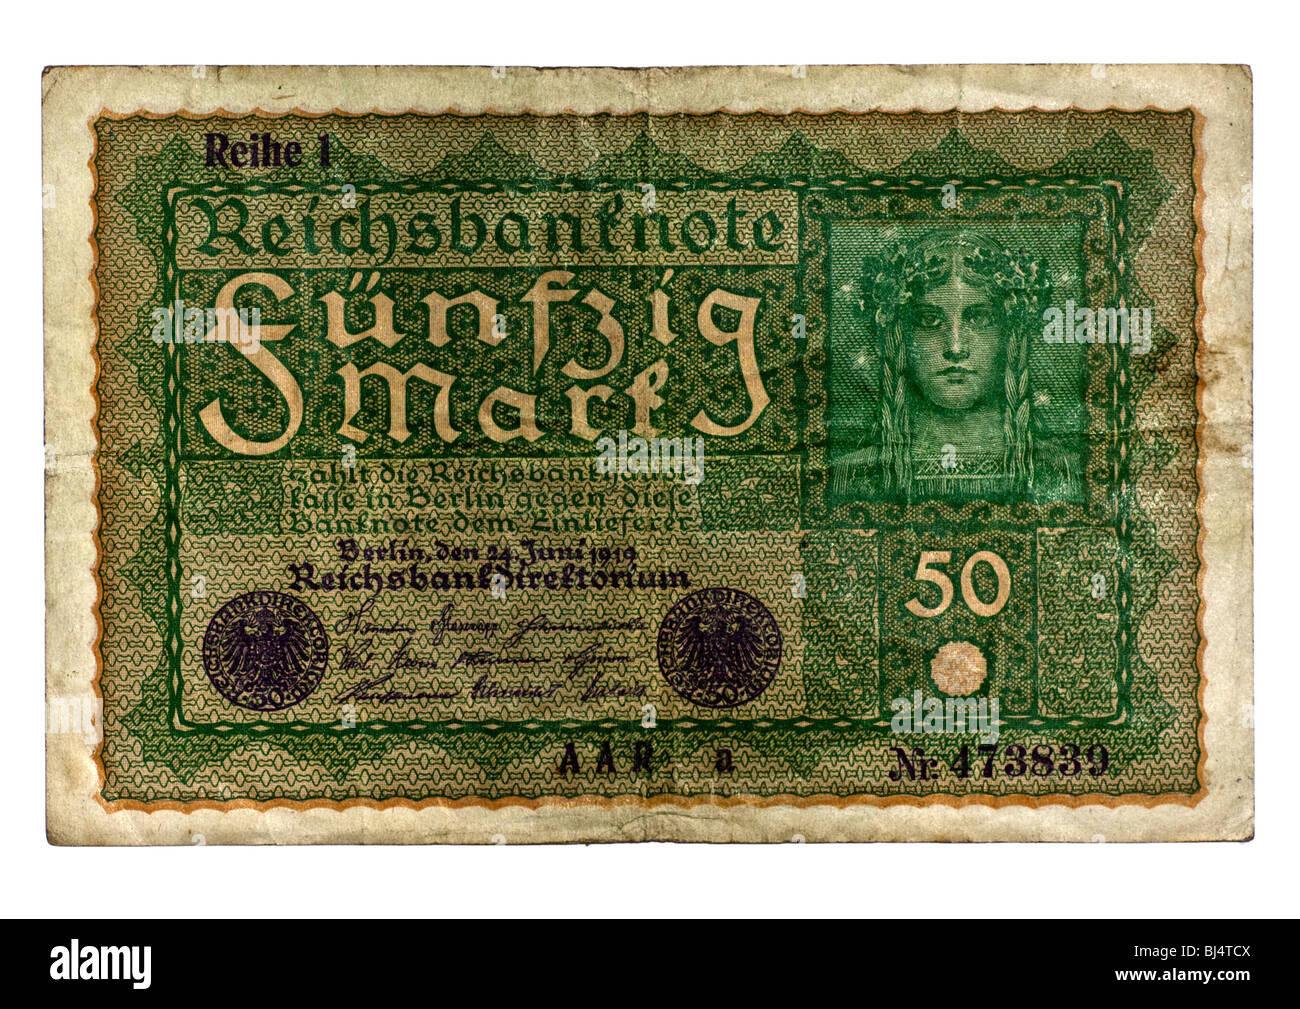 Front of a Reichsbanknote bill of the Central Bank over 50 marks, Berlin, Germany, June 24th 1919 Stock Photo